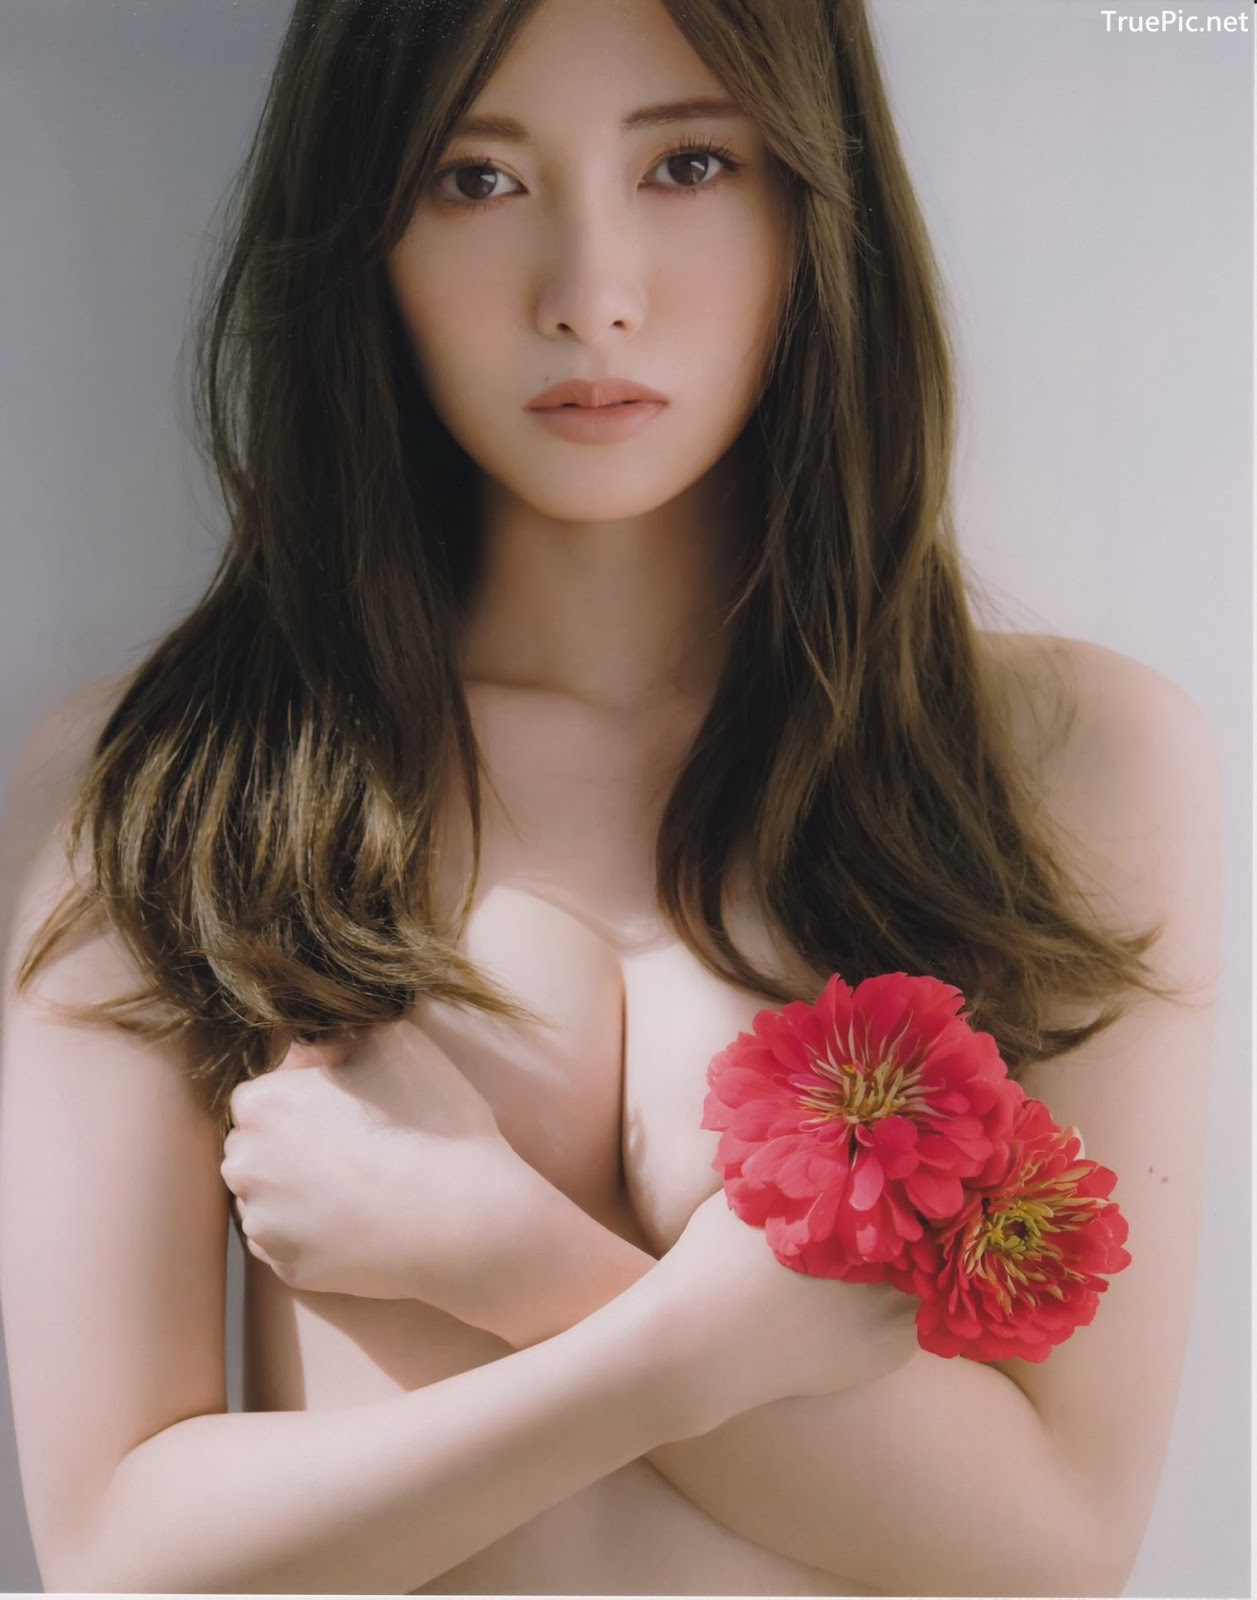 Image Japanese Singer And Model - Mai Shiraishi - Charming Beauty Of Angel - TruePic.net - Picture-32